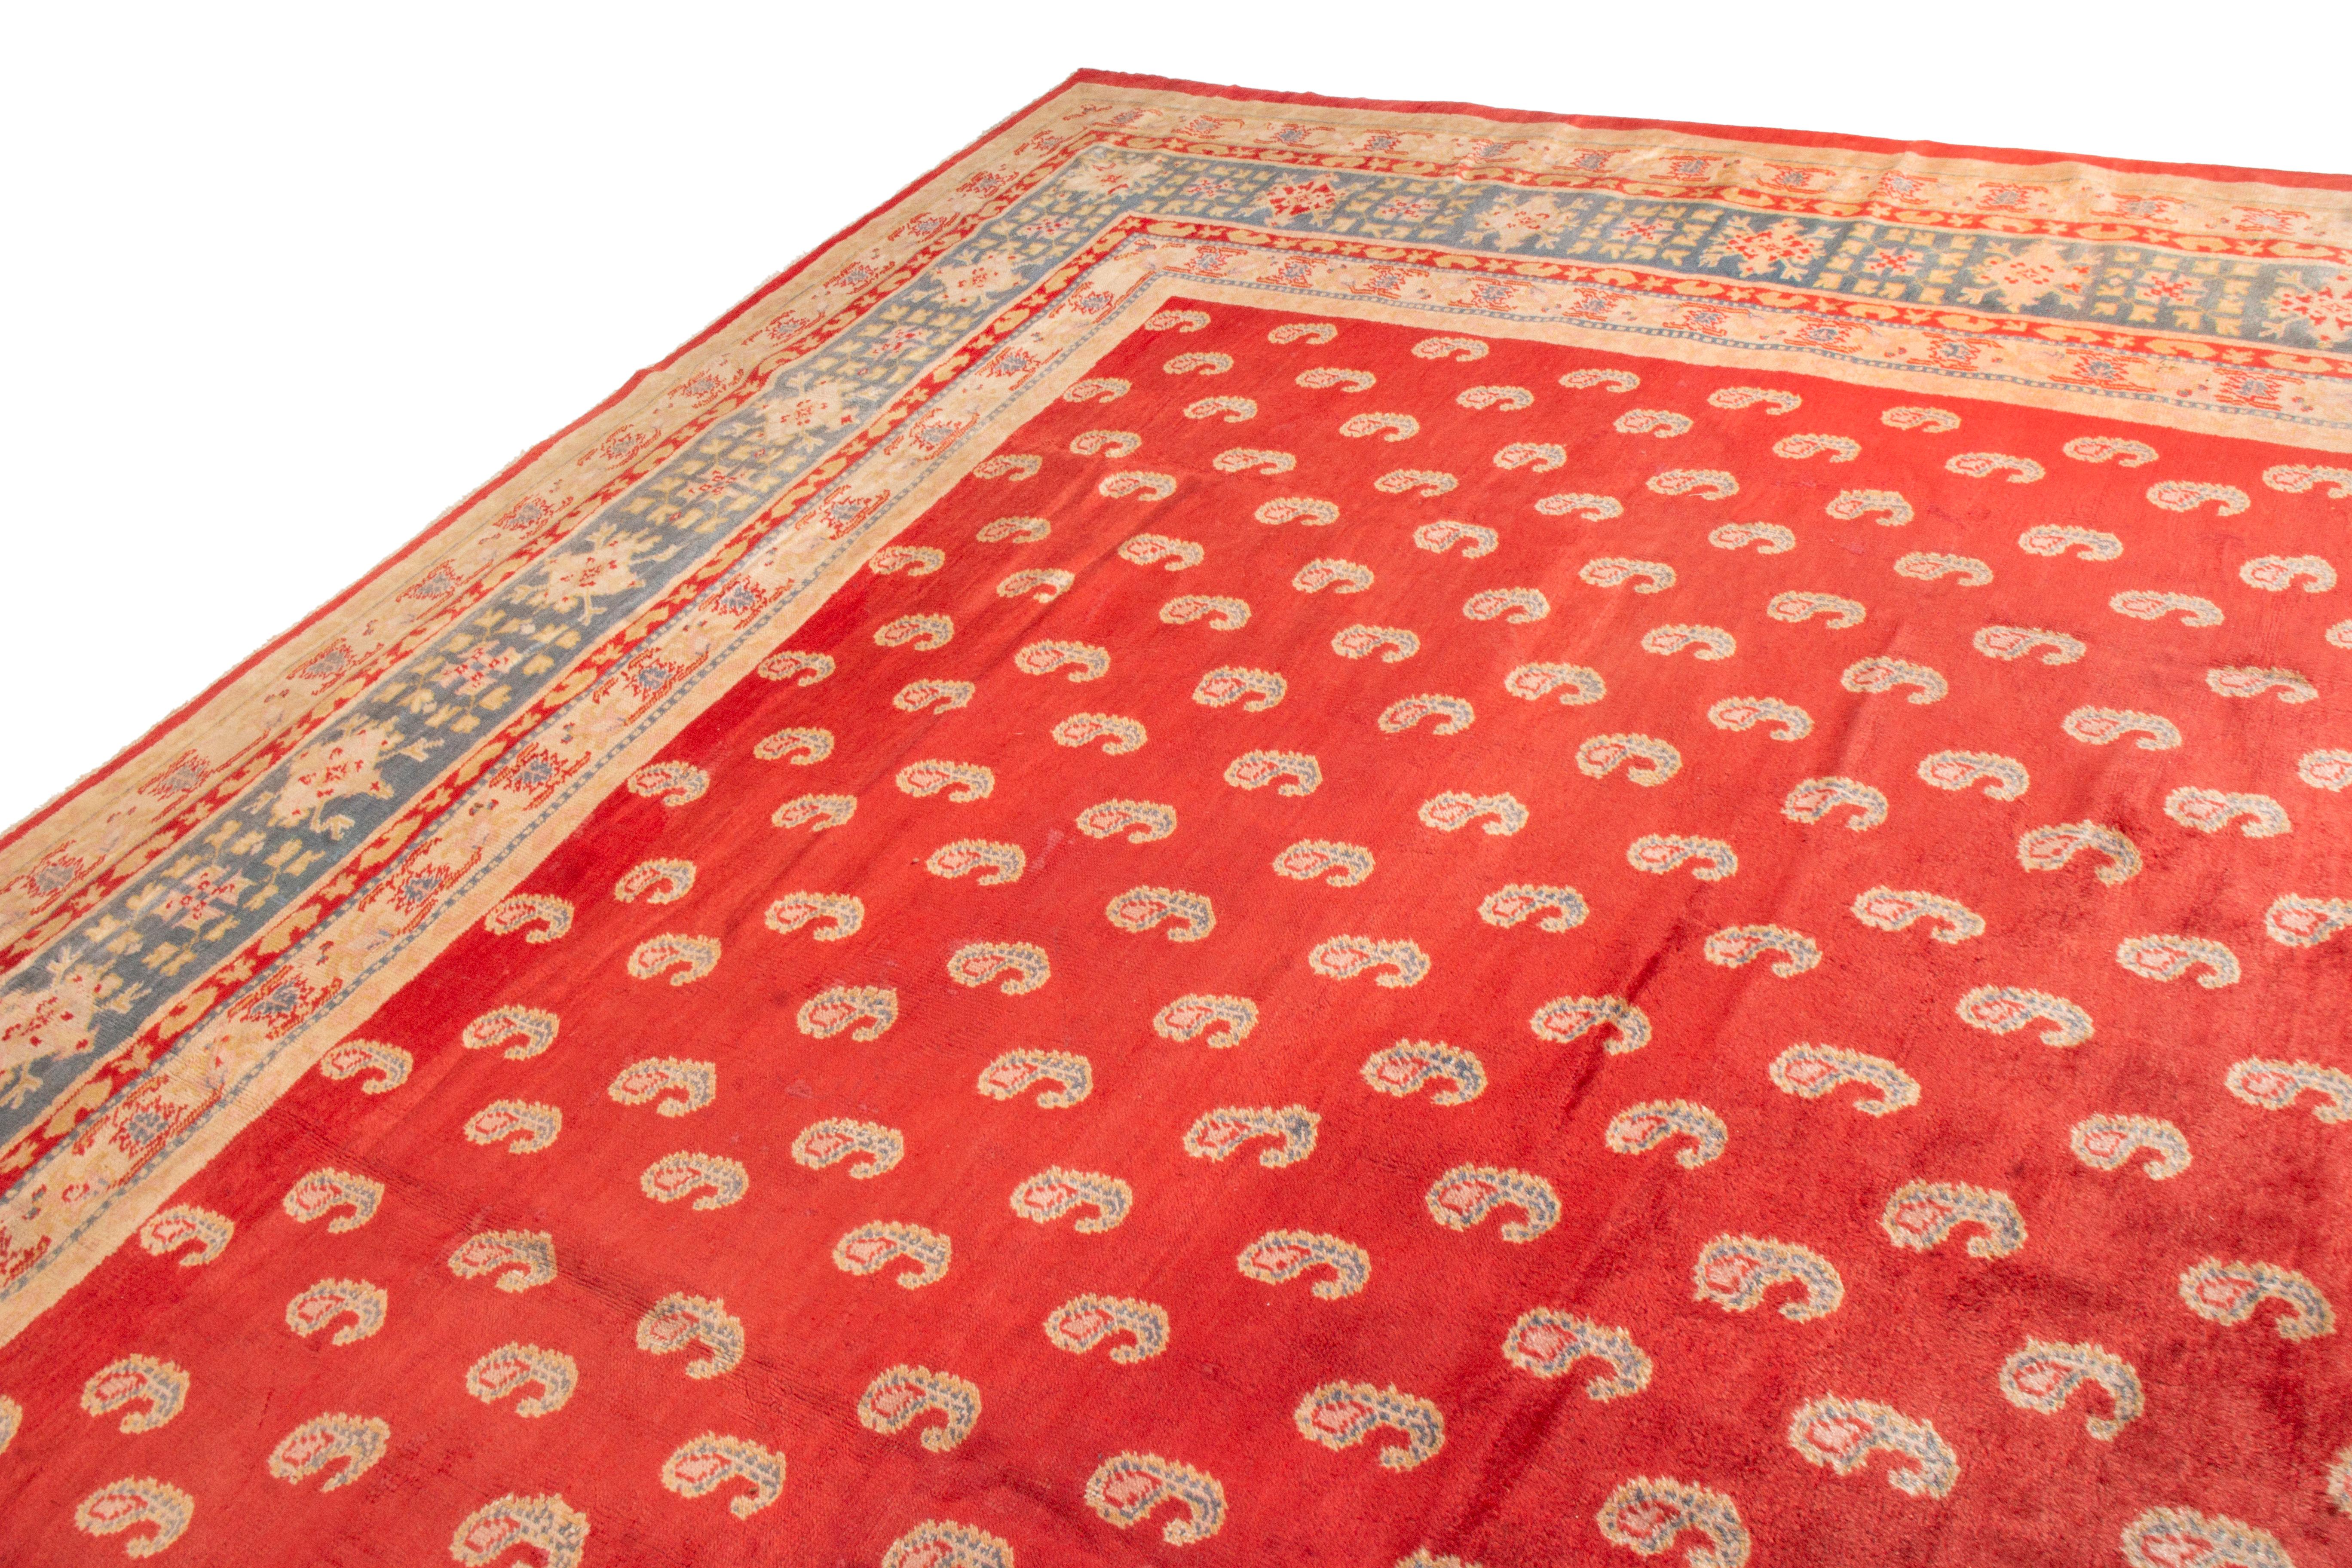 This antique Oushak wool rug has a traditional style with idyllic color ways from this era. Originating from 1910, the combination of bright red, artisan beige, and muted blue is a distinct Oushak trait, though the Paisleys depicted in the field are